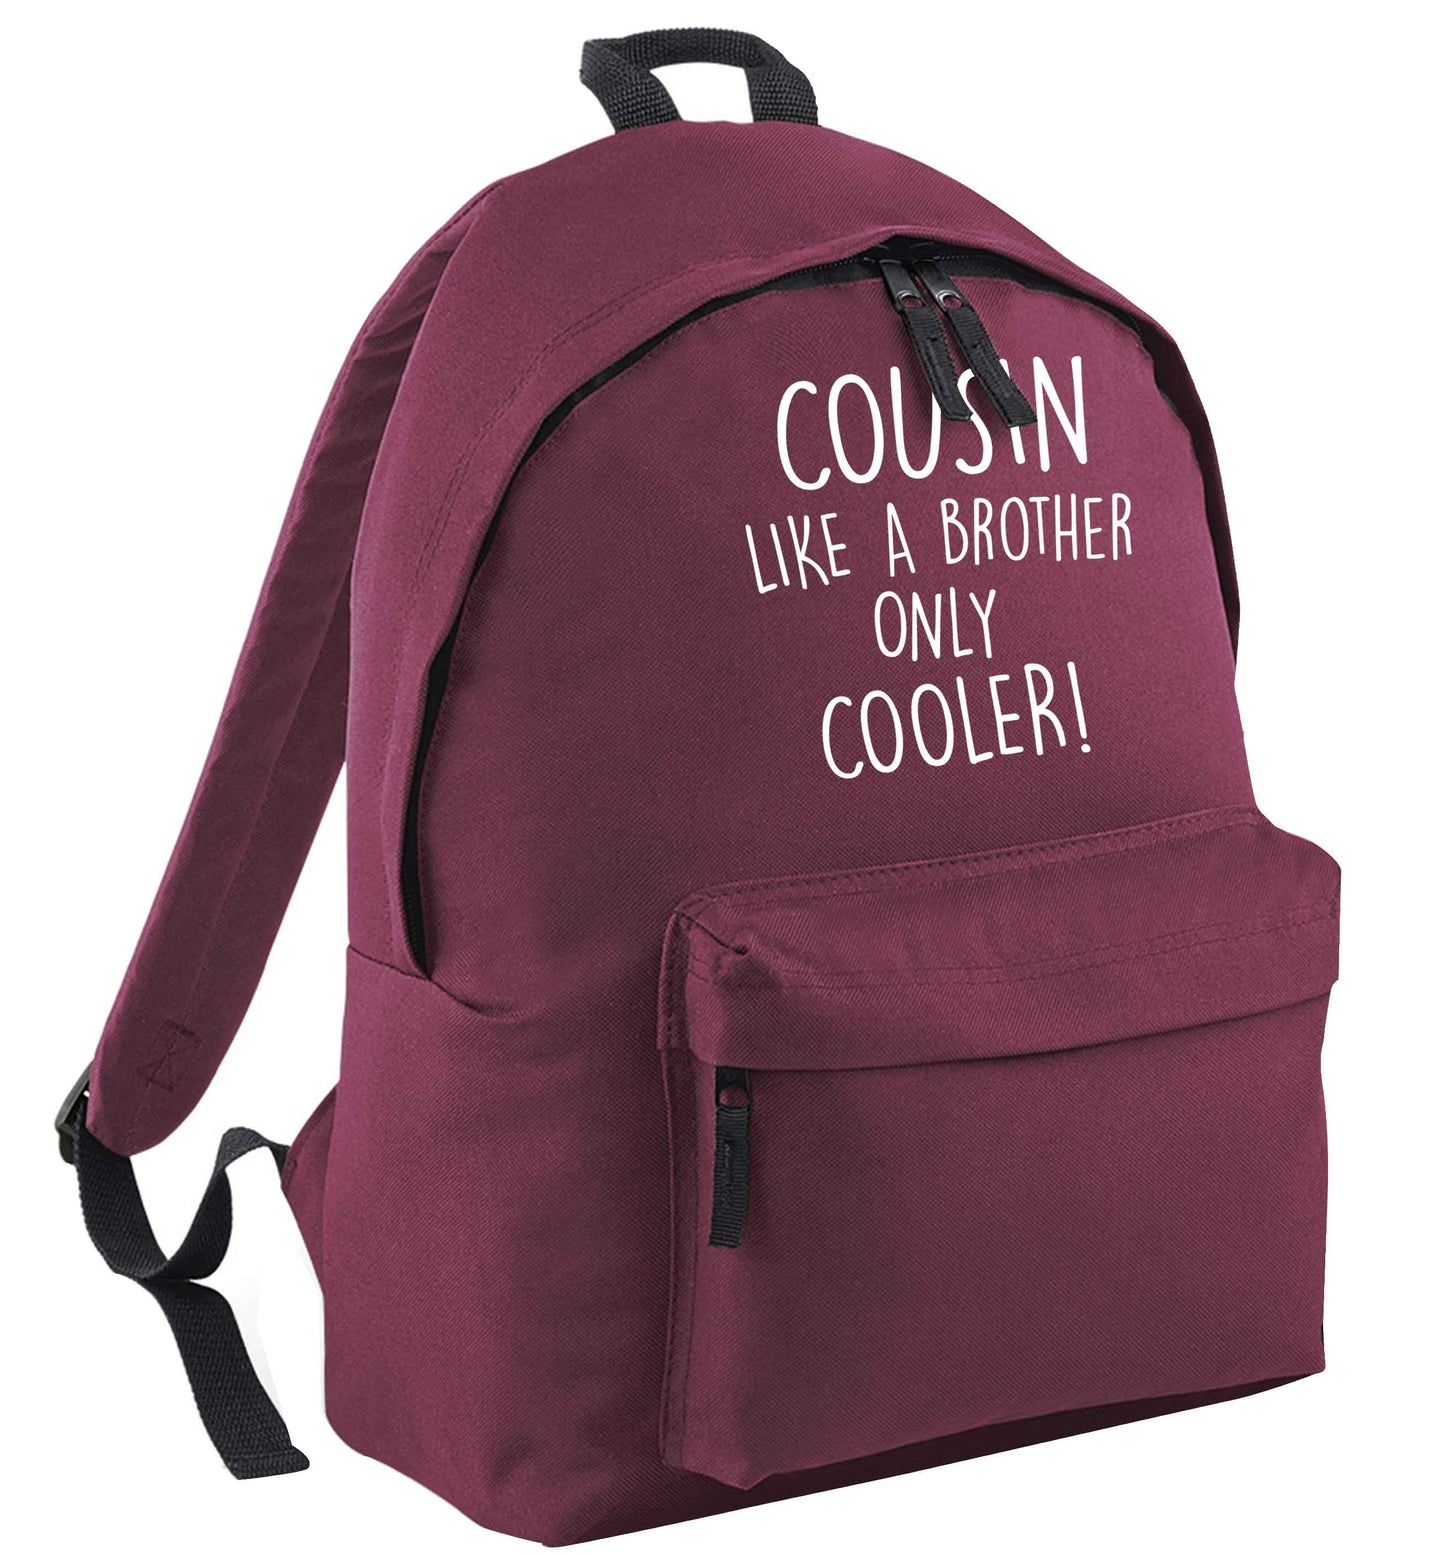 Cousin like a brother only cooler | Children's backpack